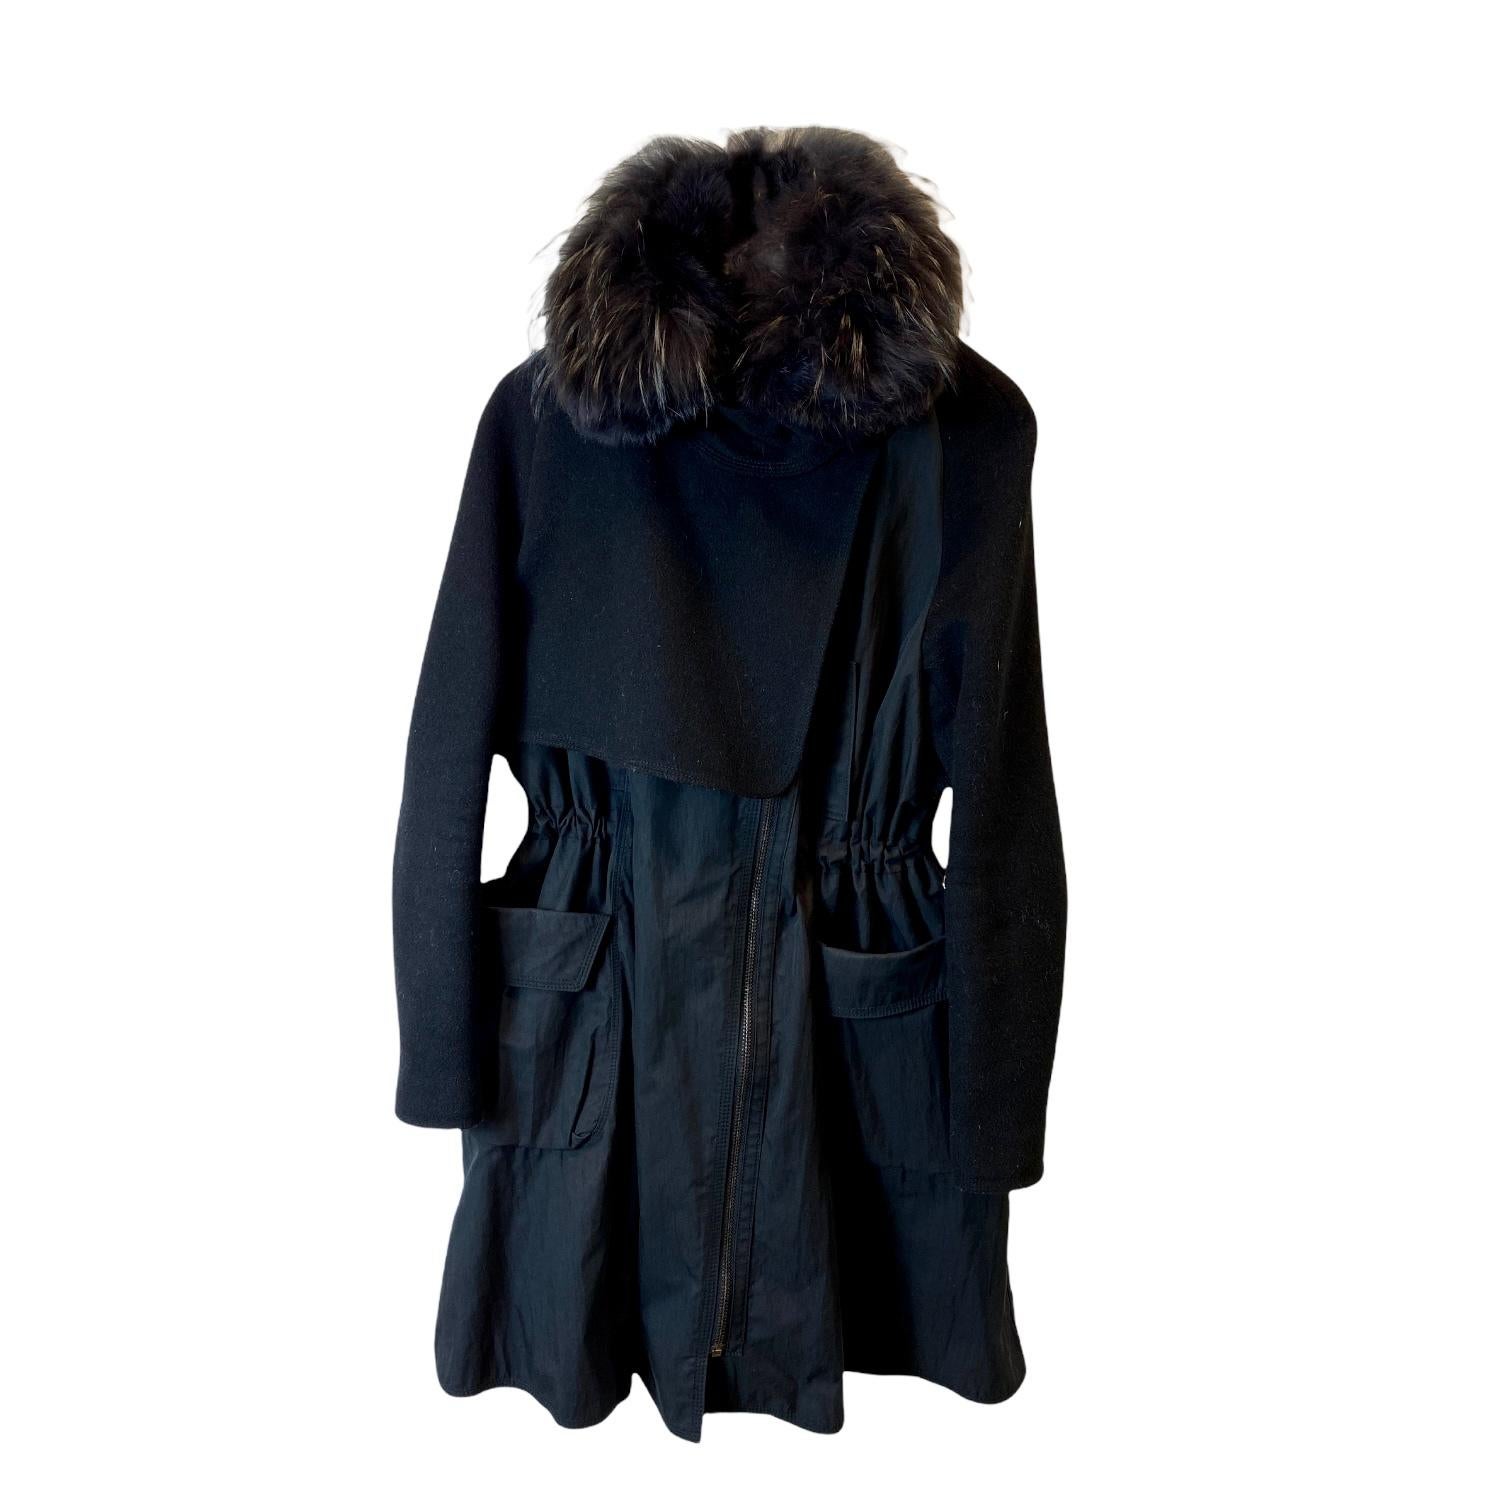 0'2nd for Barney's Long Coat with Rabbit Fur Hood
4 Front Pockets
Removable Lining
Size 6